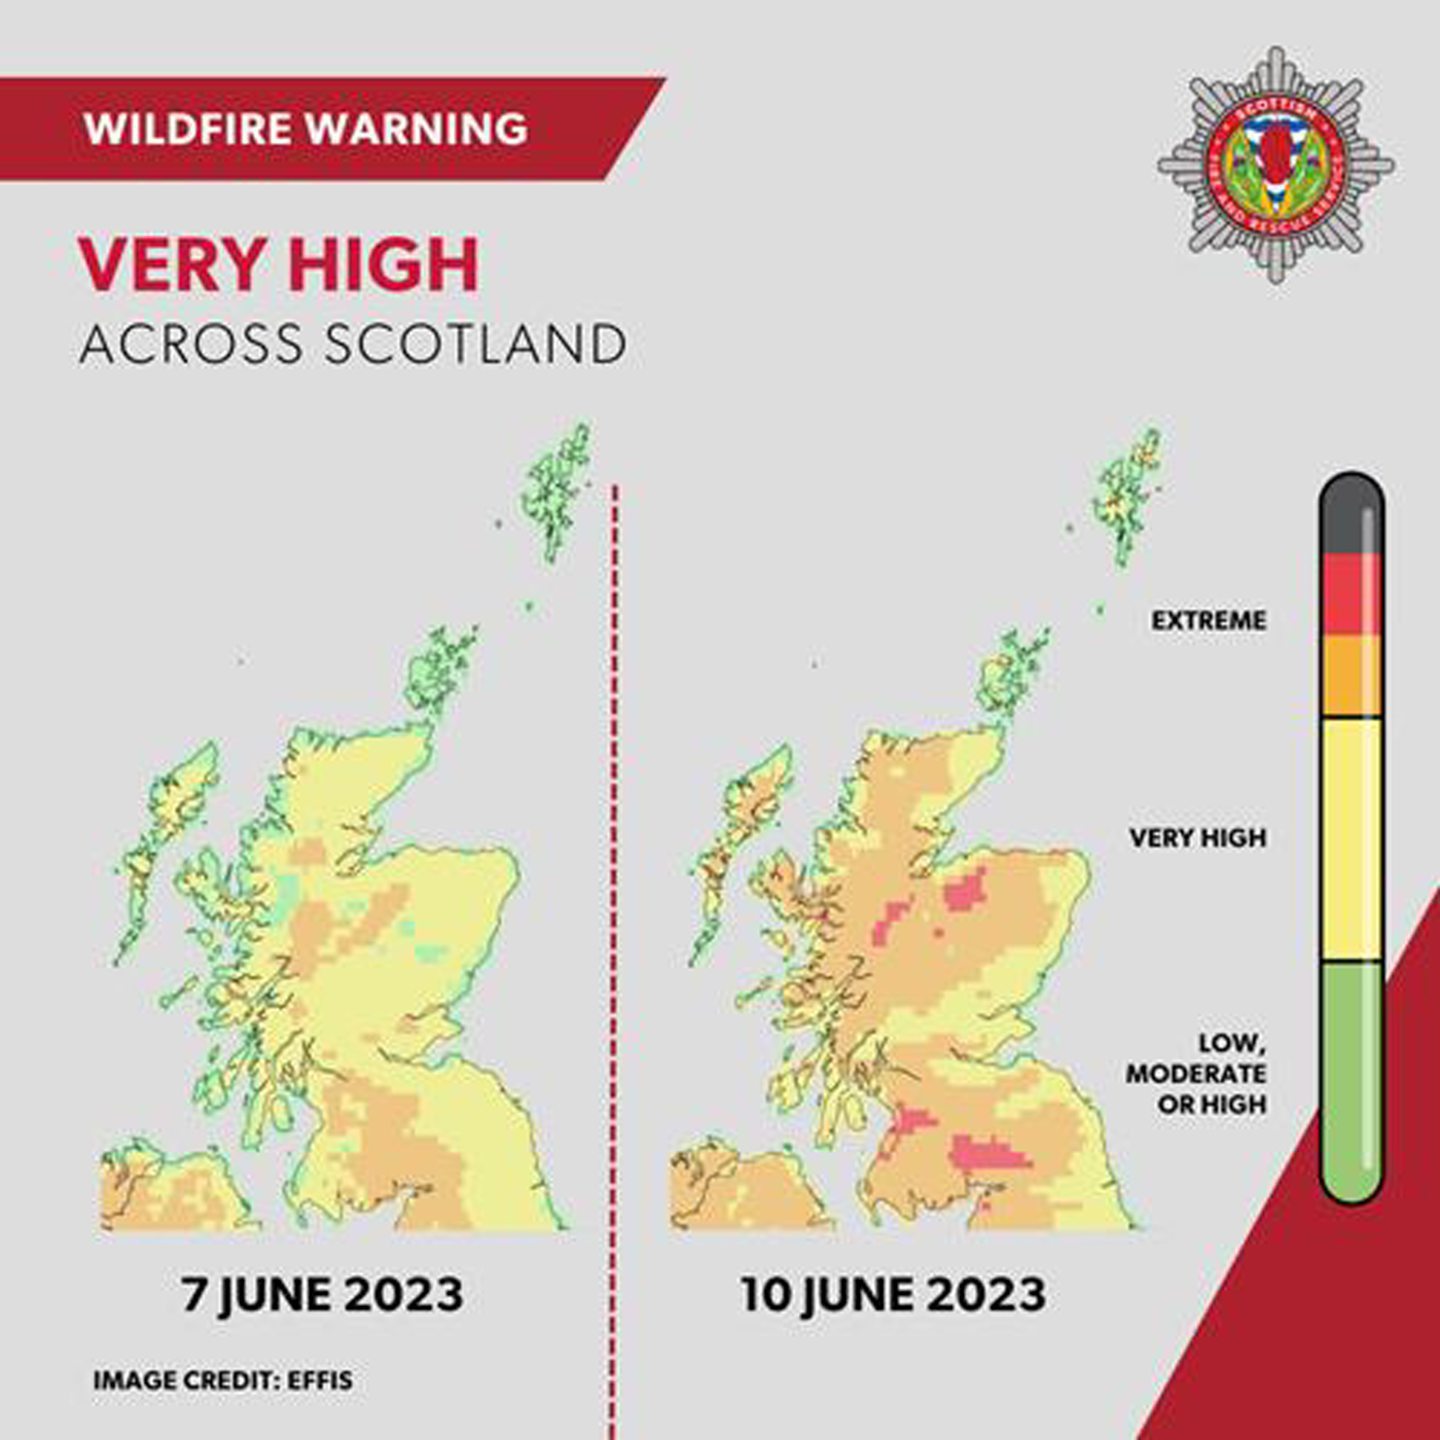 Map showing wildfire risk areas across Scotland. 